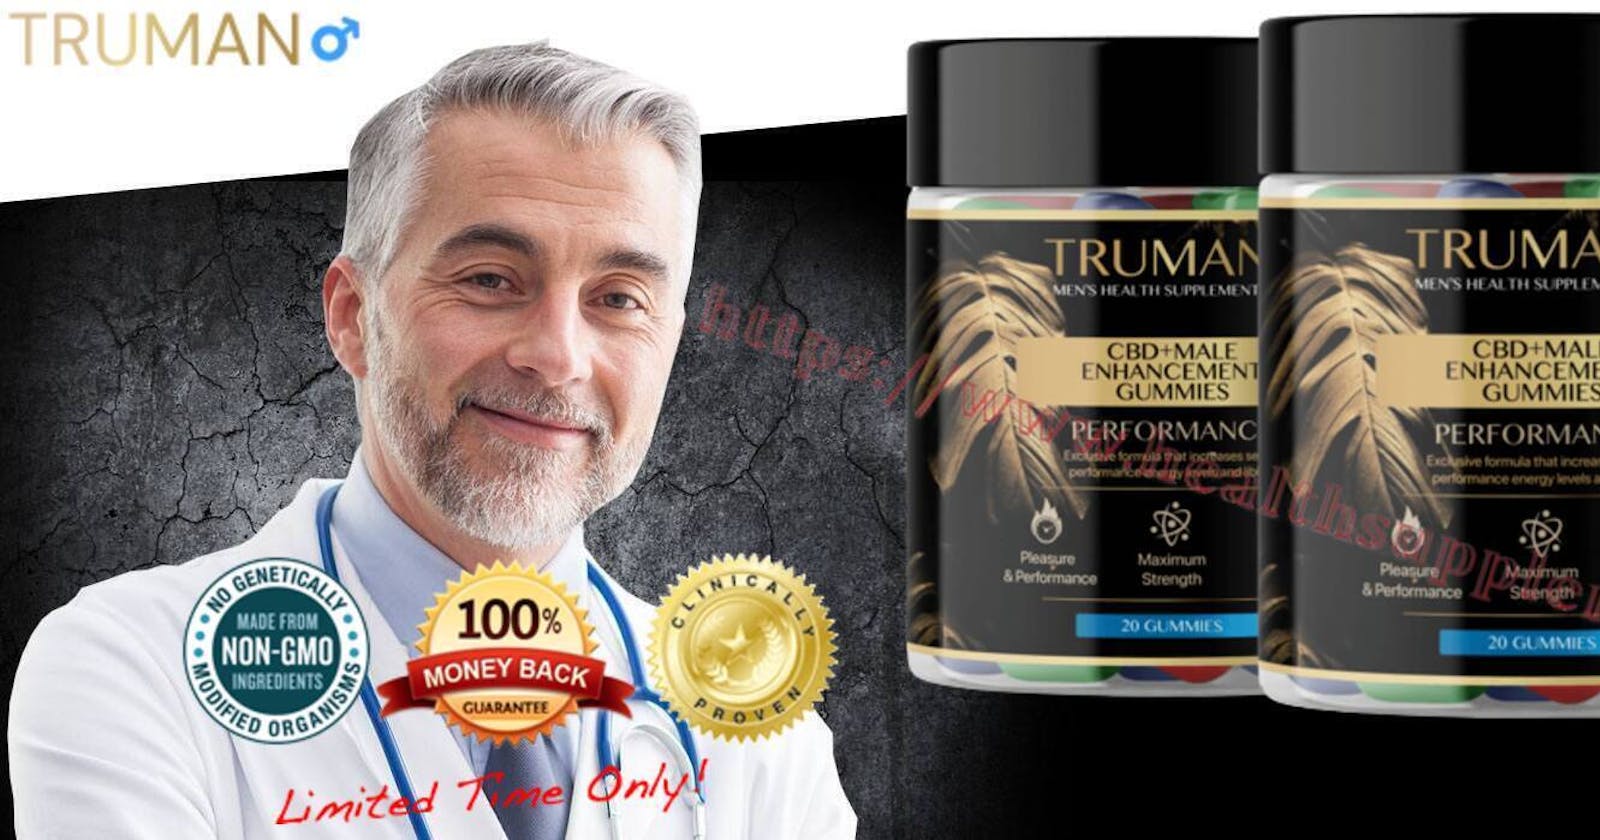 Truman CBD Male Enhancement Gummies Will Help To Enhances Sex Drive And Libido[SPECIAL NEW YEAR SALE OFFER](Spam Or Legit)